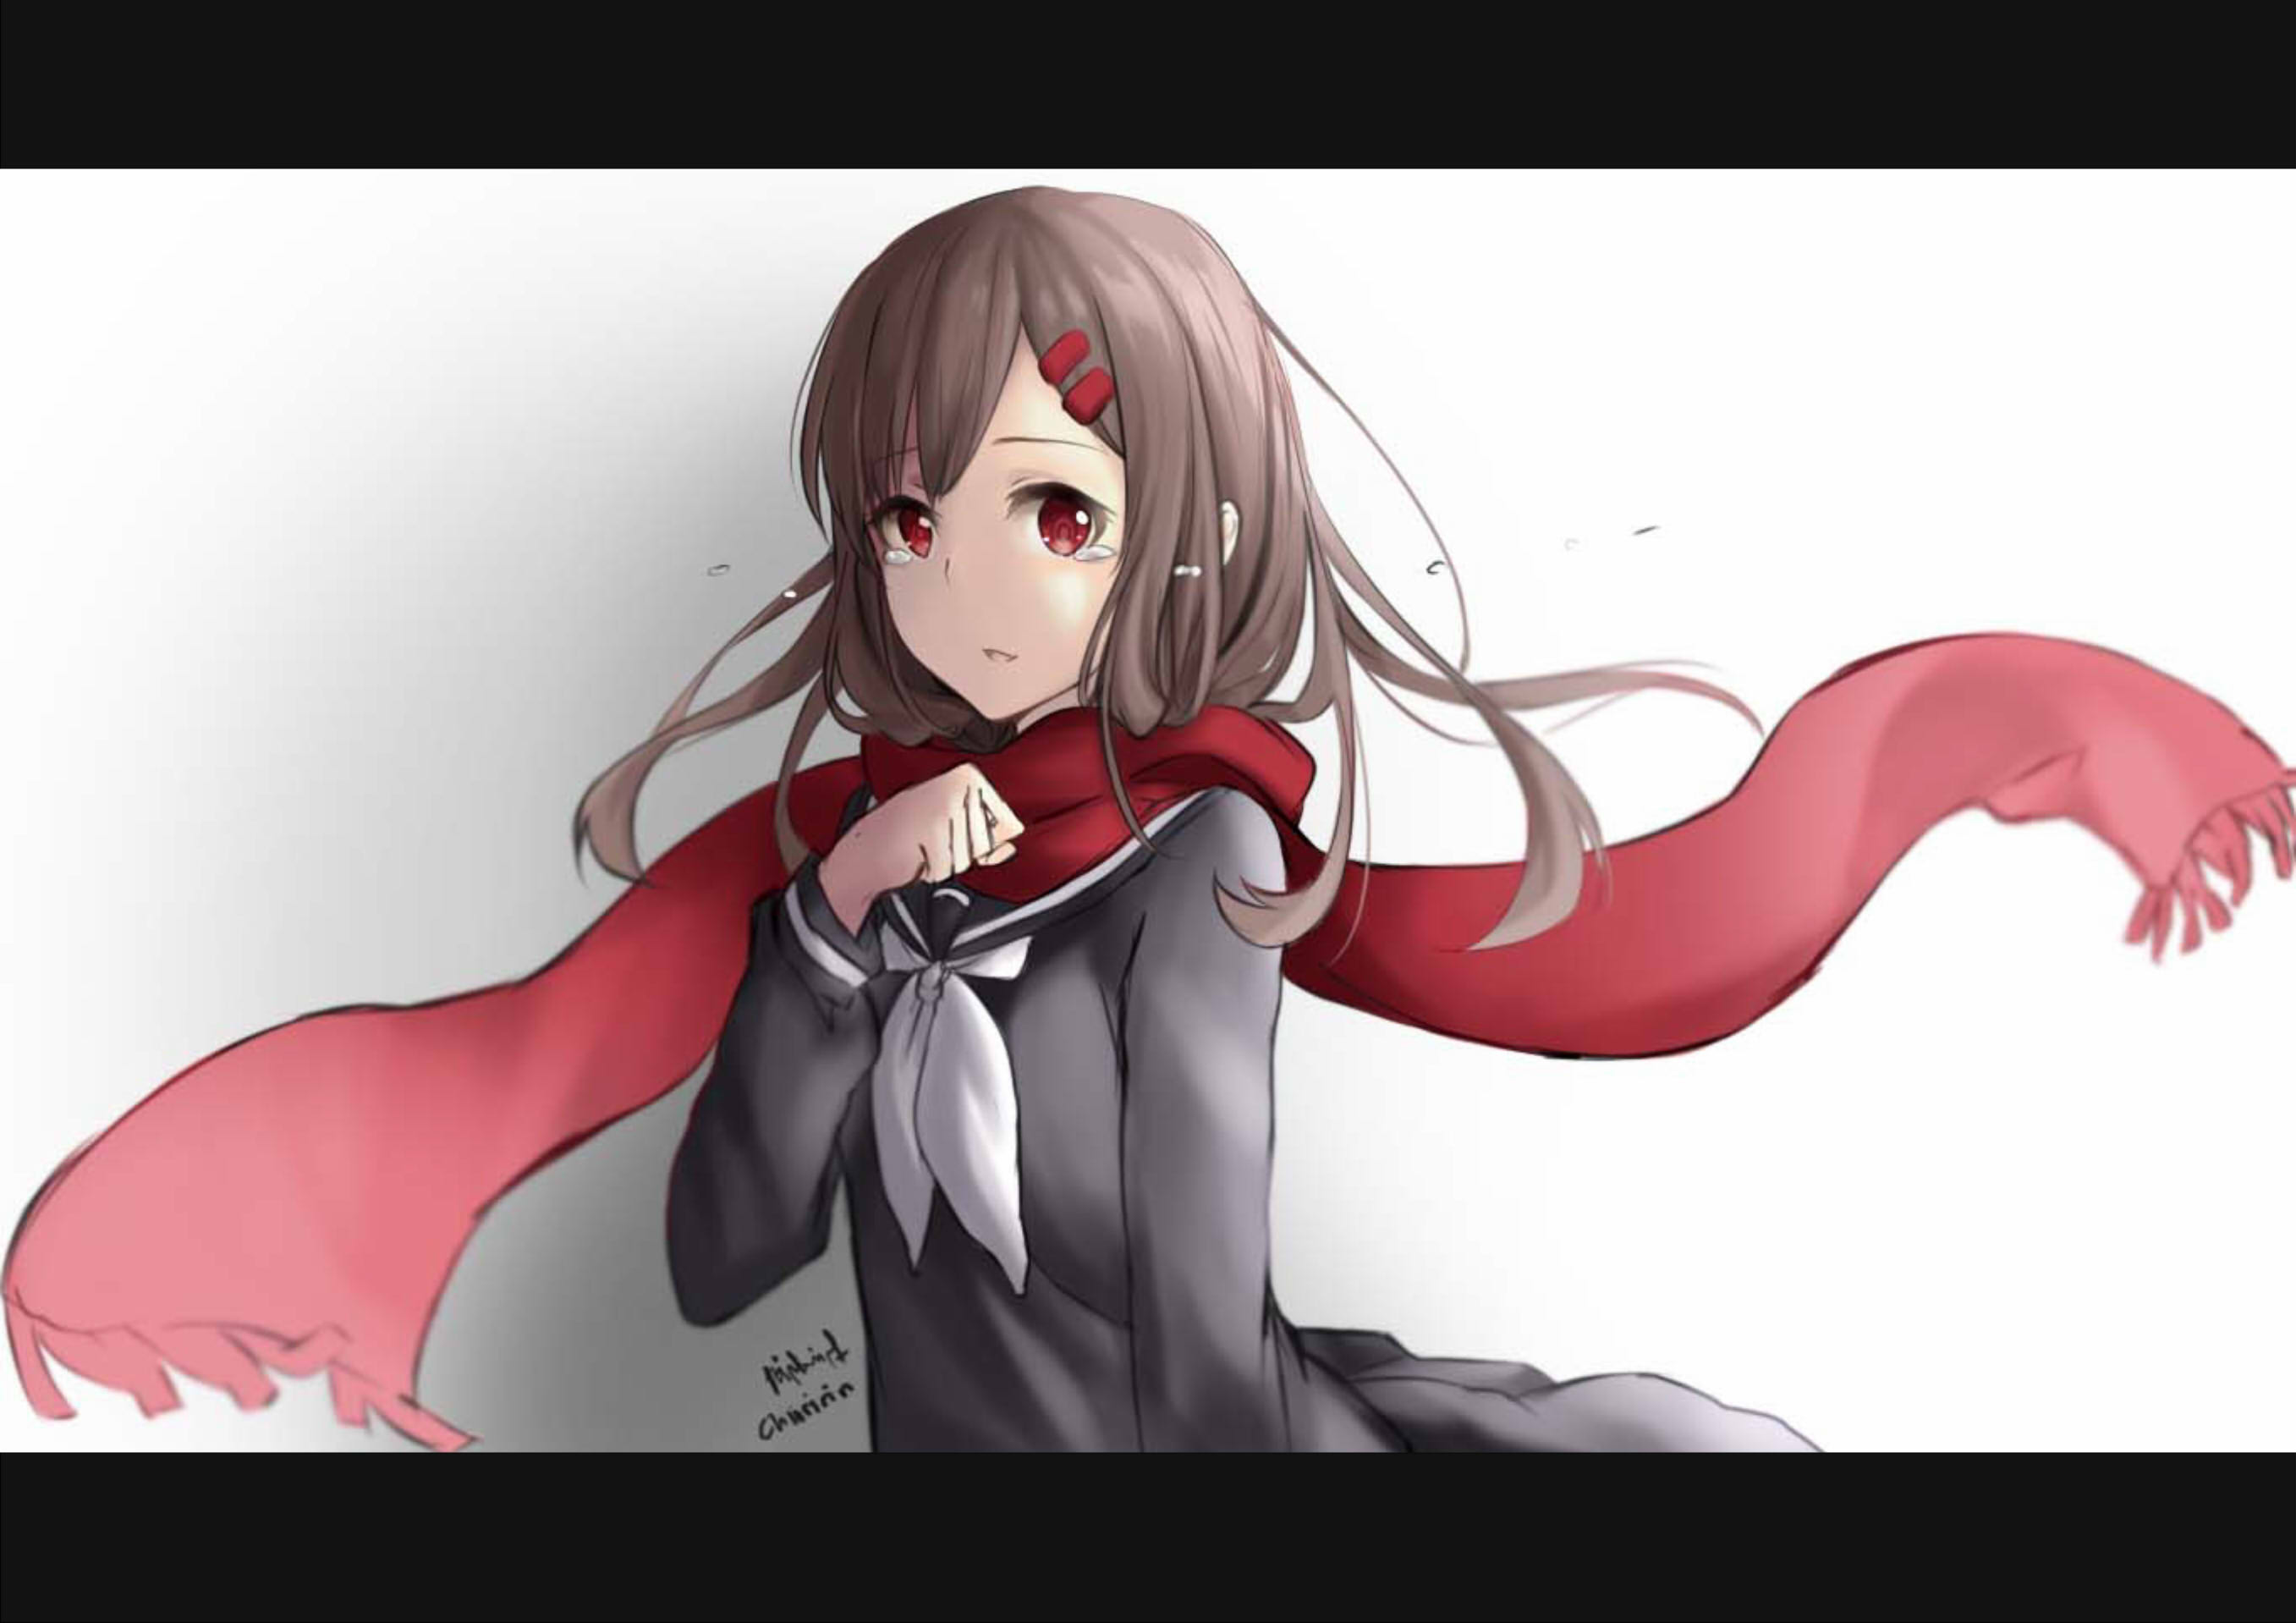 Kagerou Project Picture by Chiiririn - Image Abyss